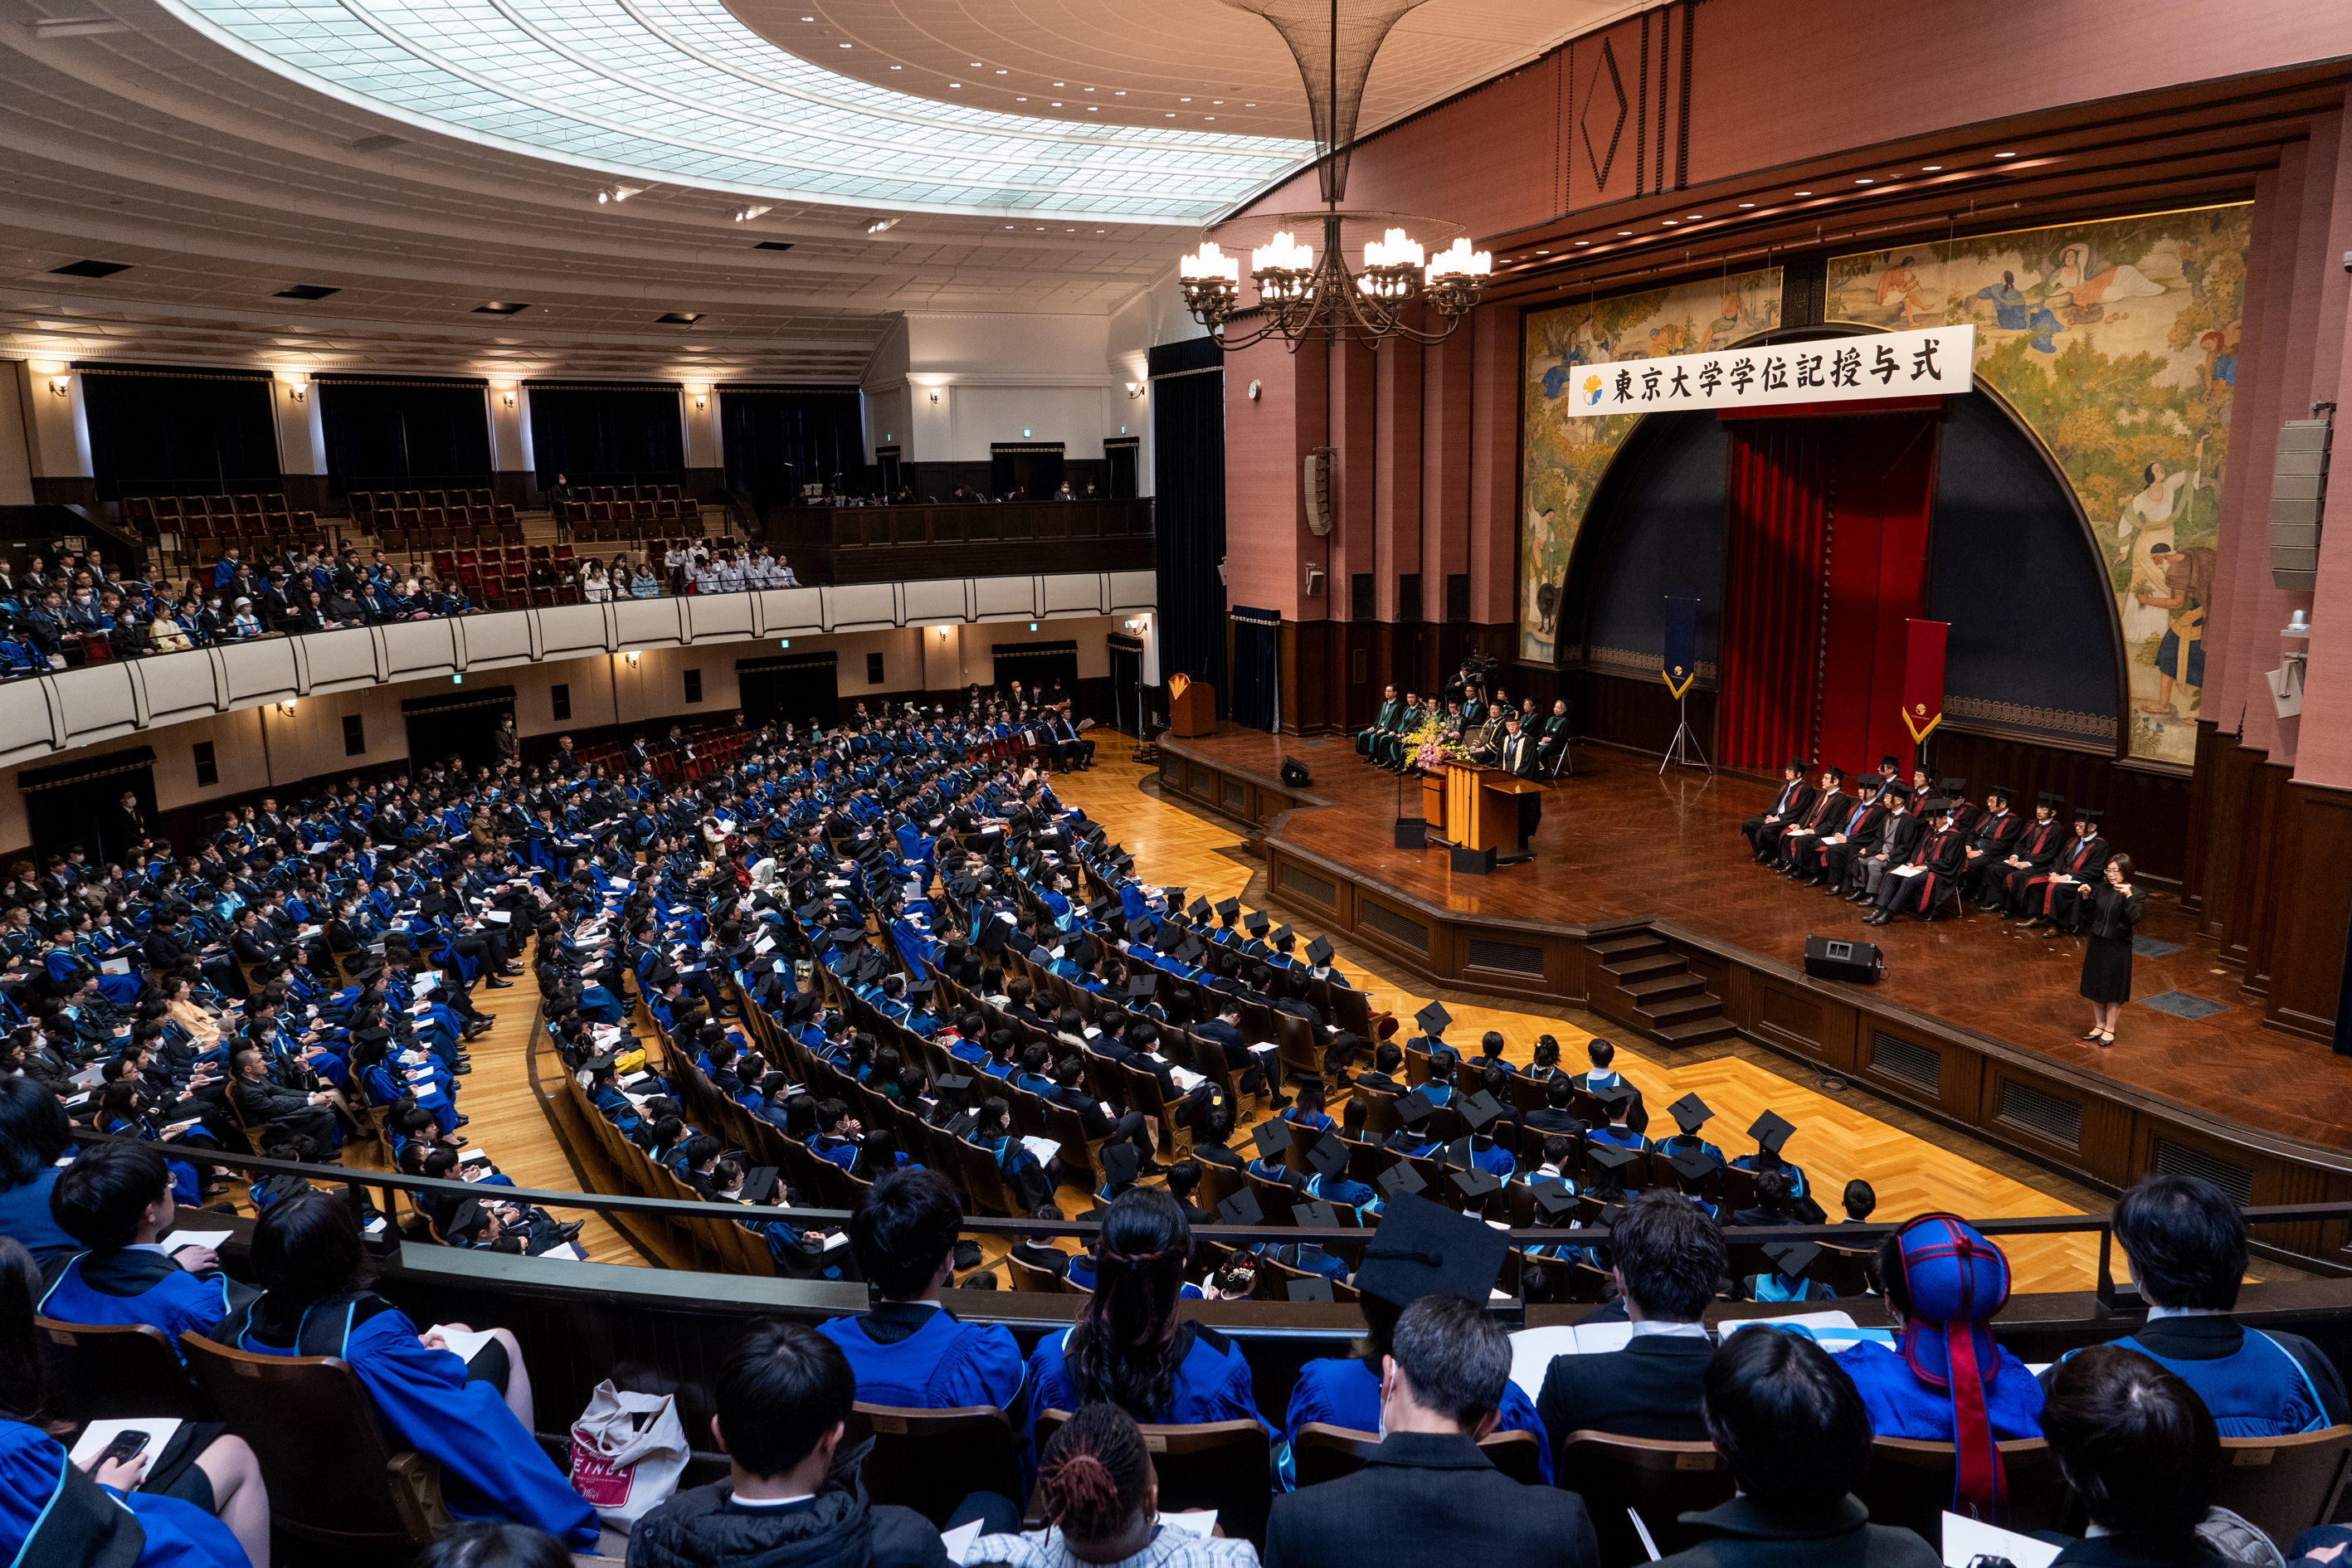 Congratulations to the 2023 Degree Conferral Ceremony, Commencement Ceremony, and President's Award Conferral Ceremony